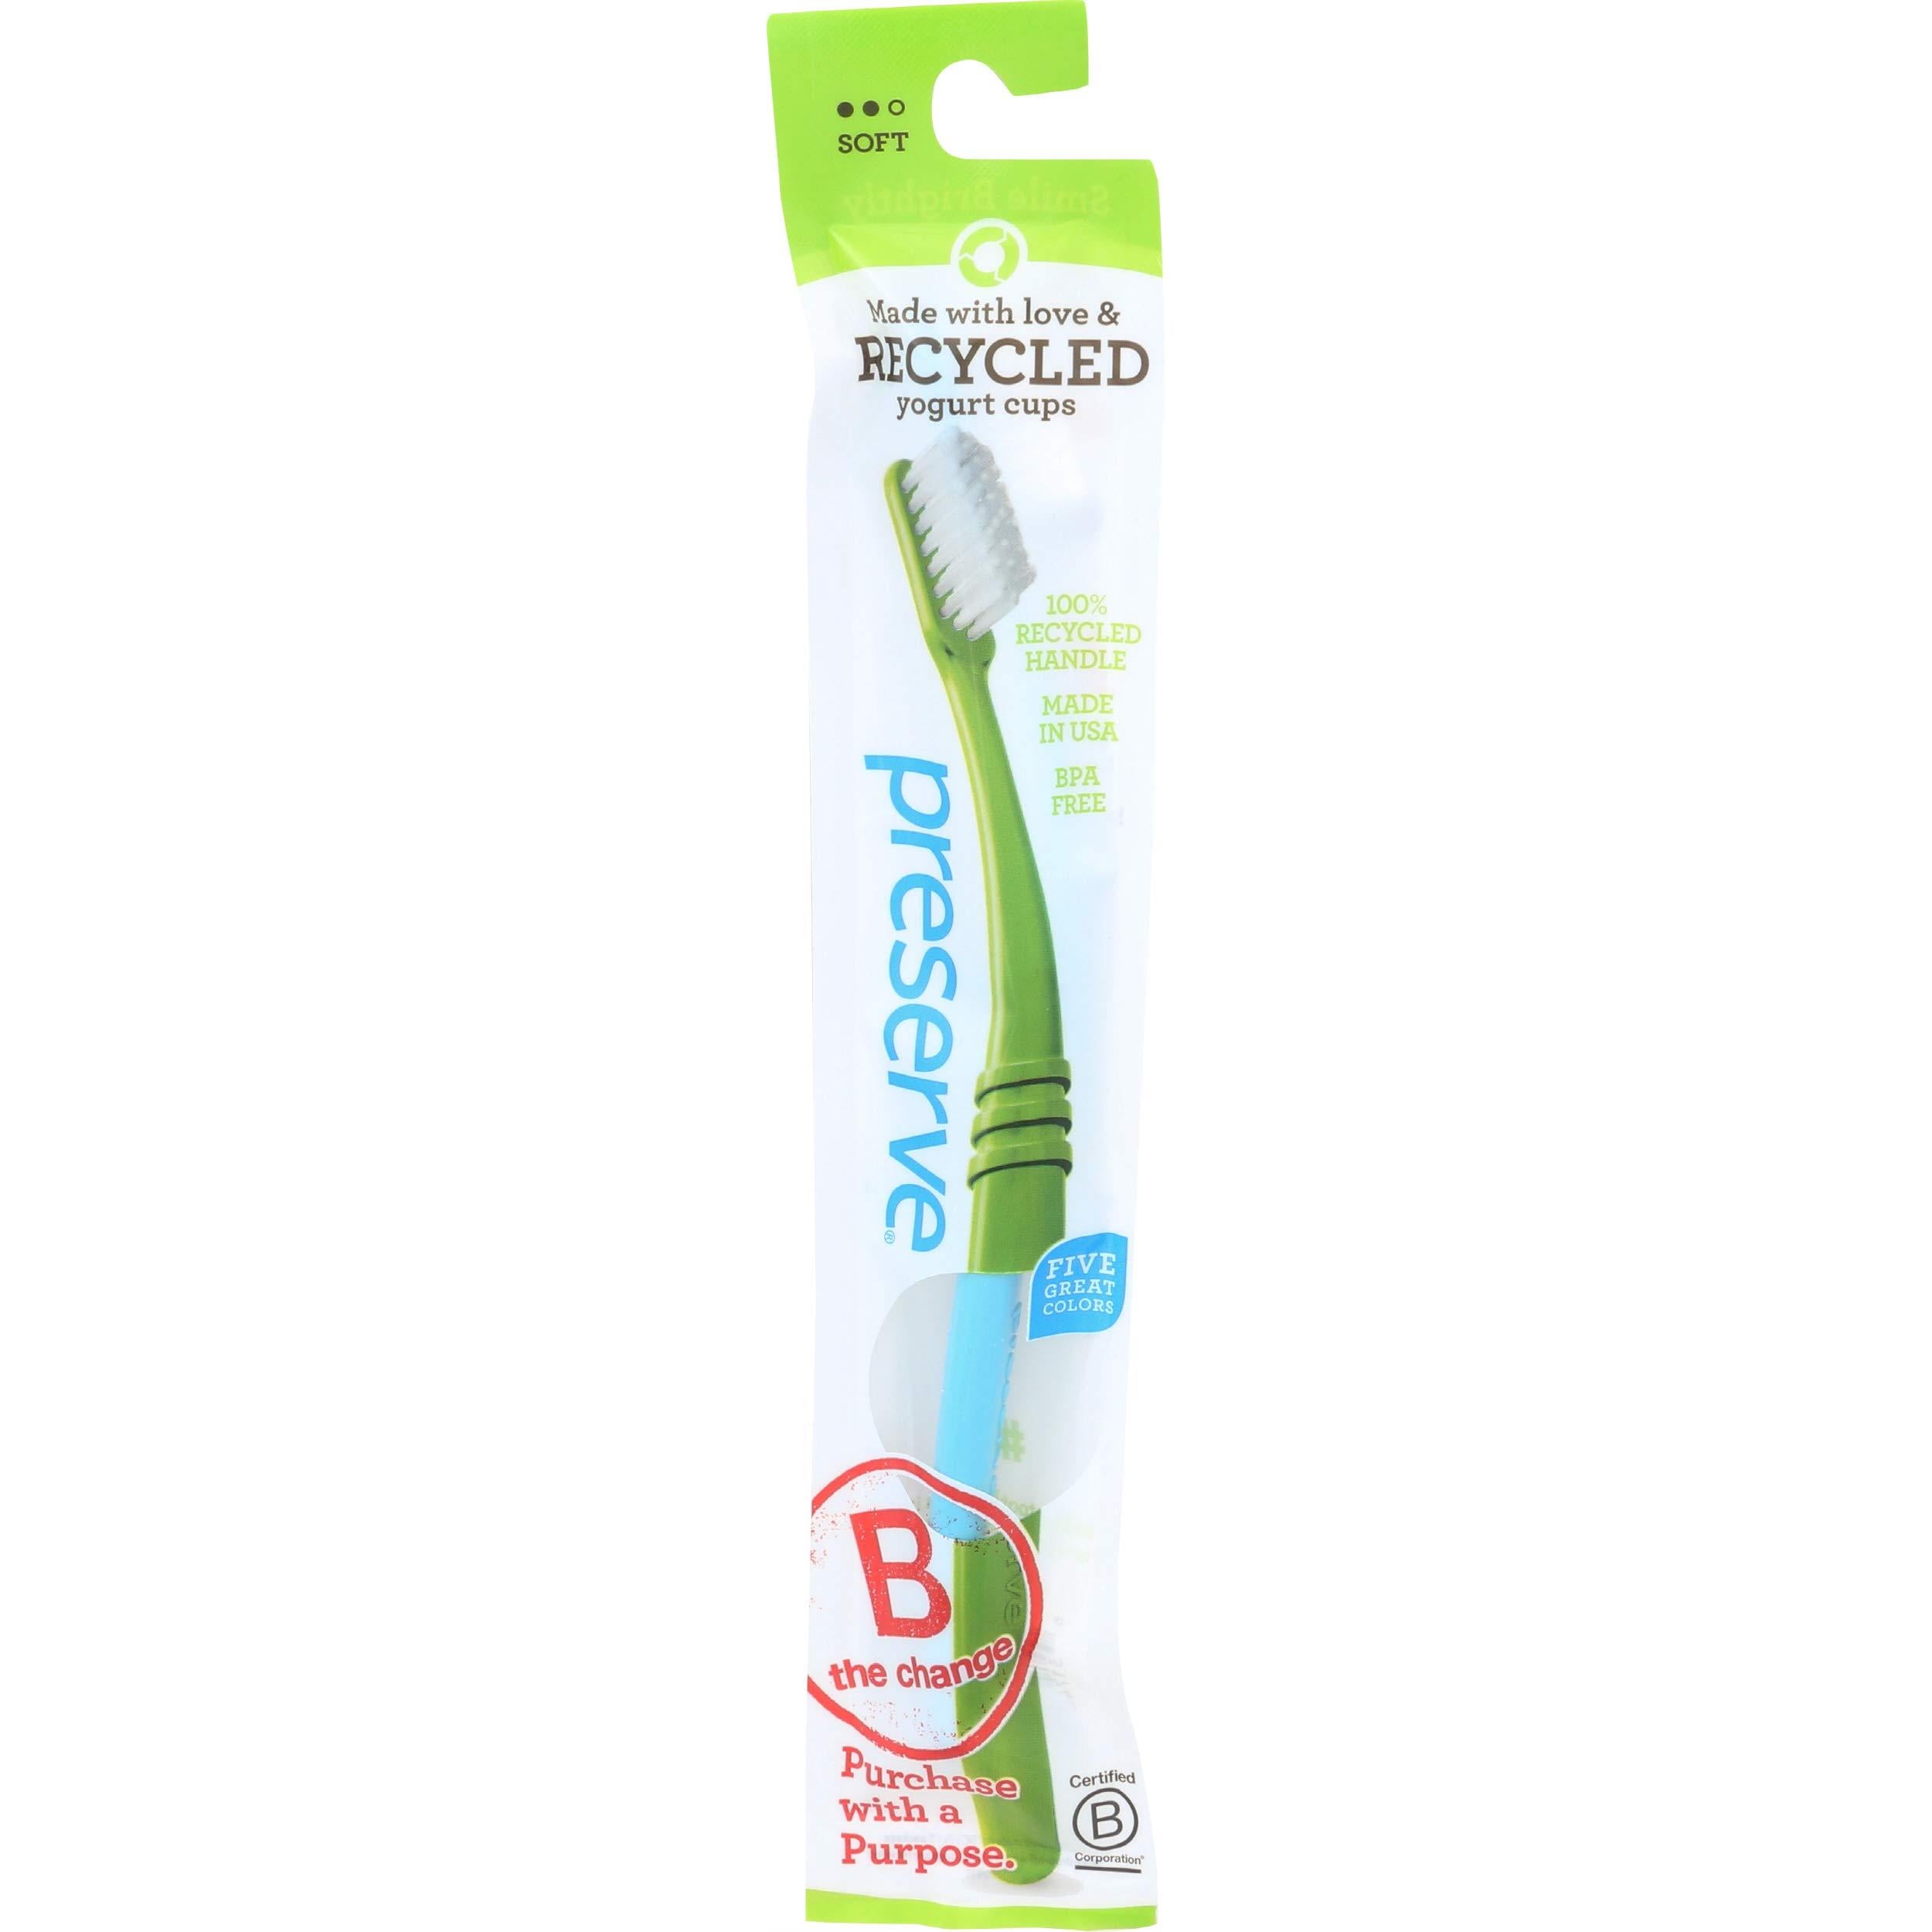 Preserve Adult Soft Toothbrush with Mailer Assorted Colors